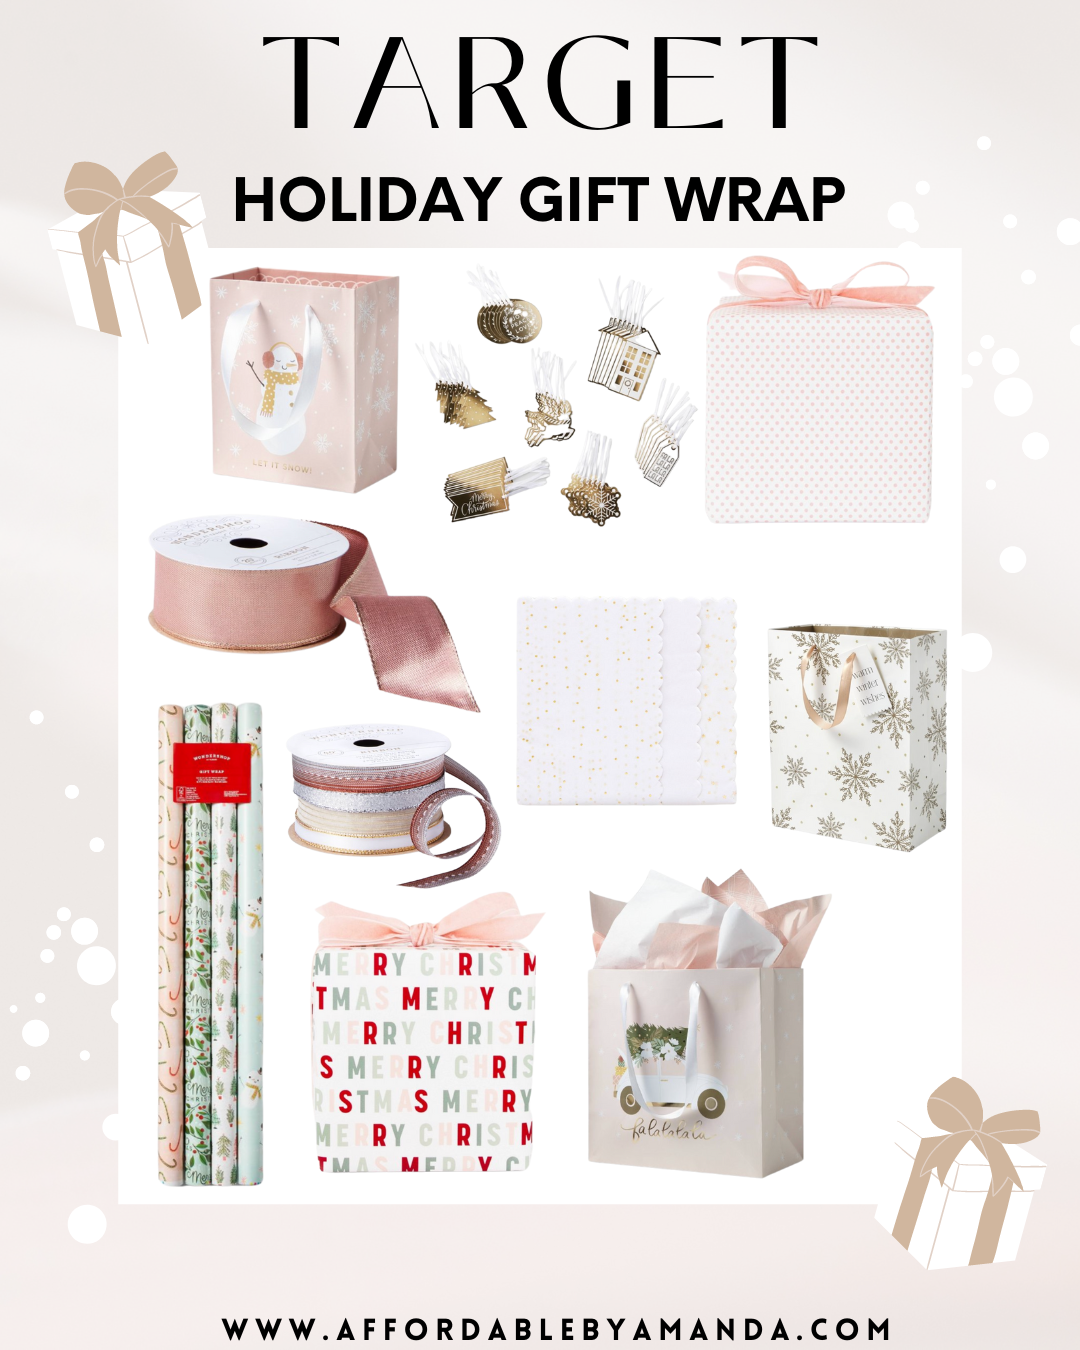 The Sugar Paper x Target Holiday Collection | Sugar Paper + Target Gift Wrap, Bags, Accessories for Holidays 2022